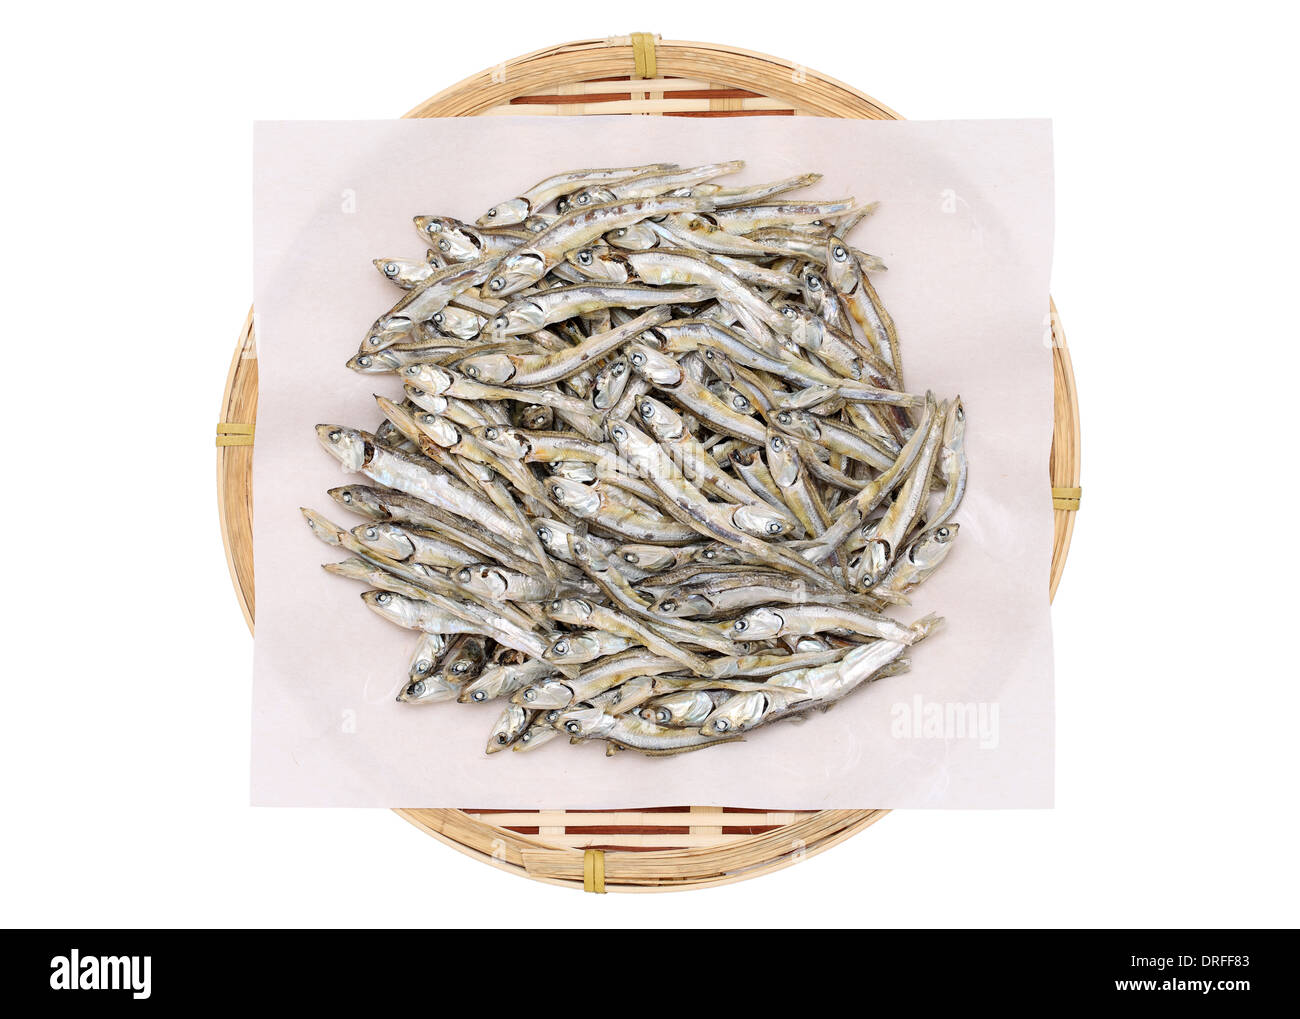 Dried small fish on bamboo colander Stock Photo